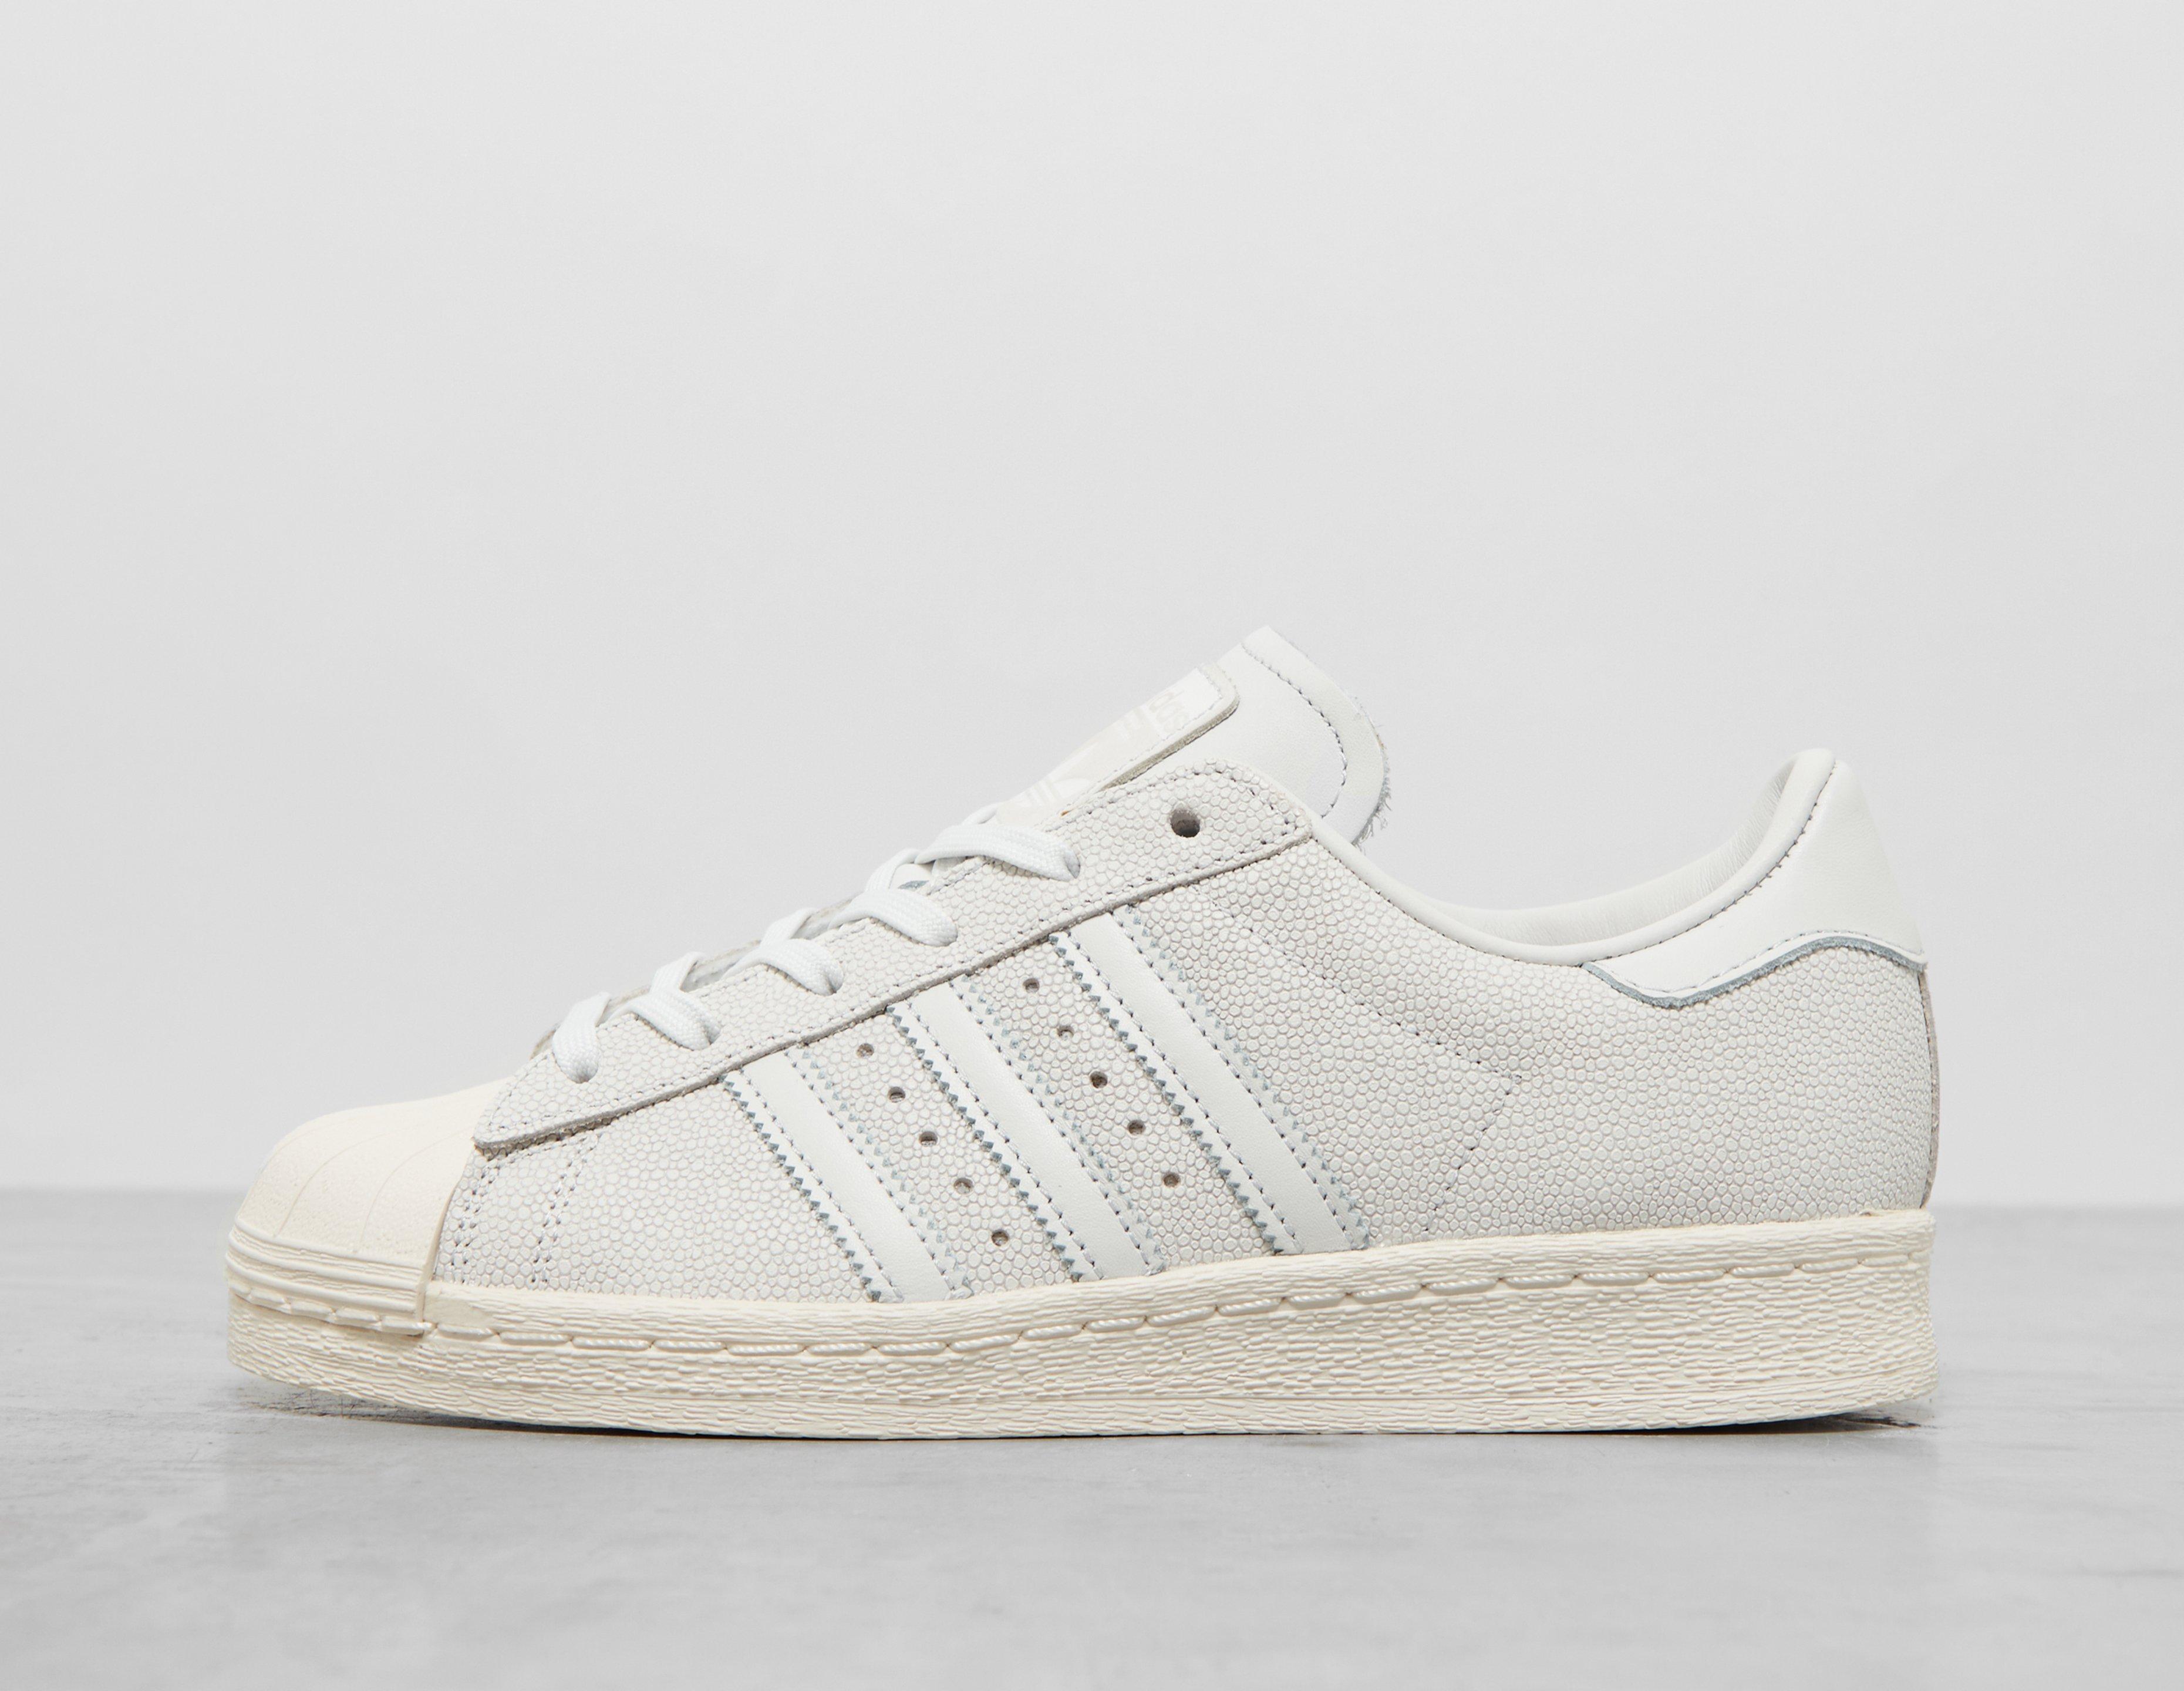 adidas originals White with pack Originals | x adicolor | champs Superstar piping HealthdesignShops commercial 82 adidas Women\'s